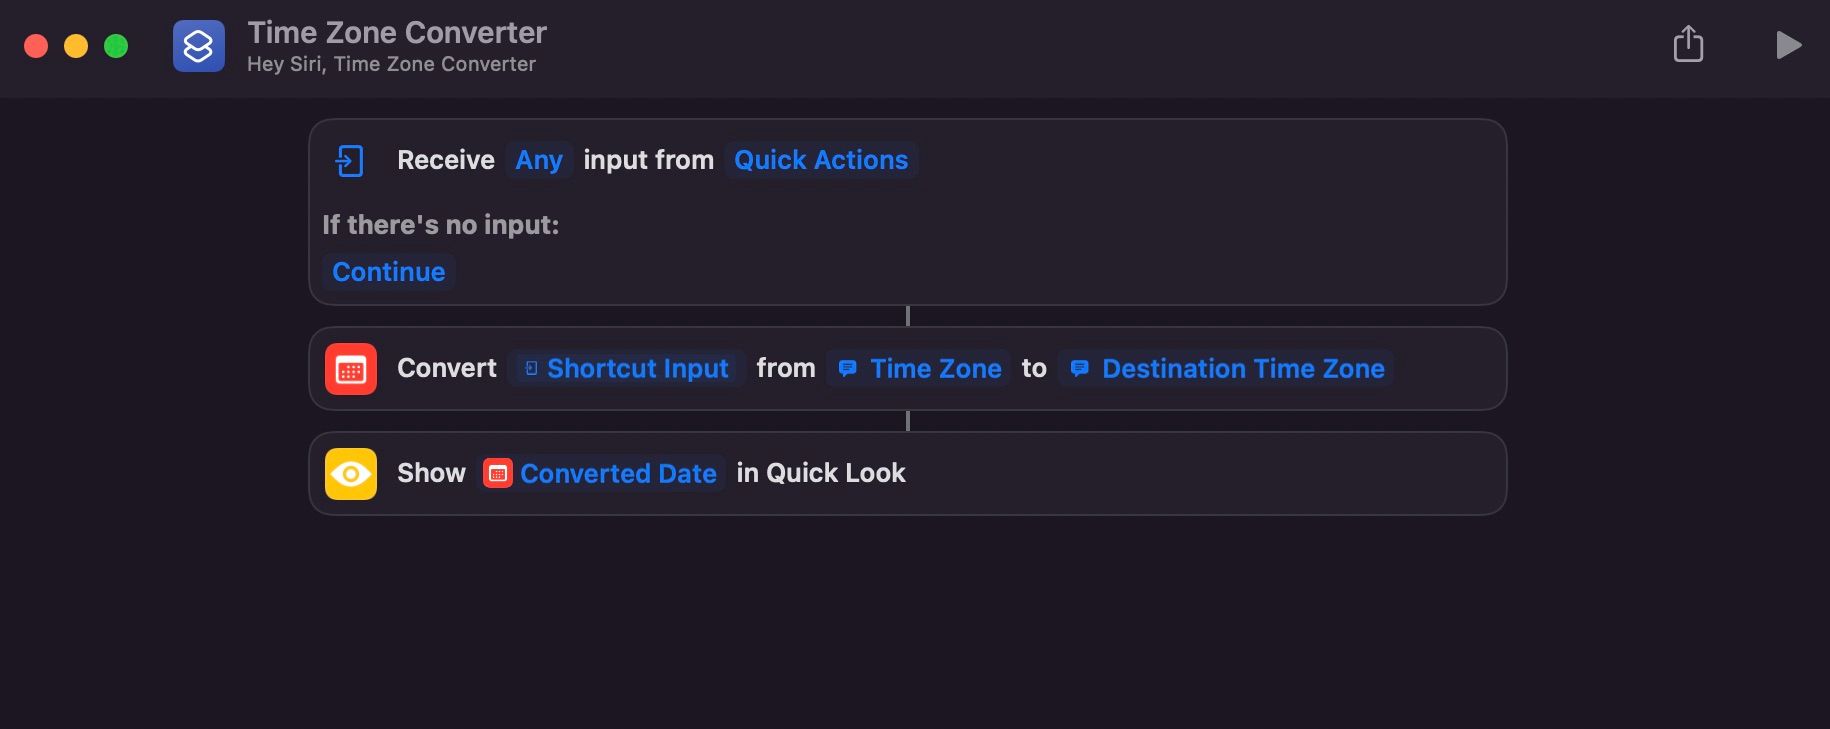 Time Zone Converter Actions in Shortcuts App